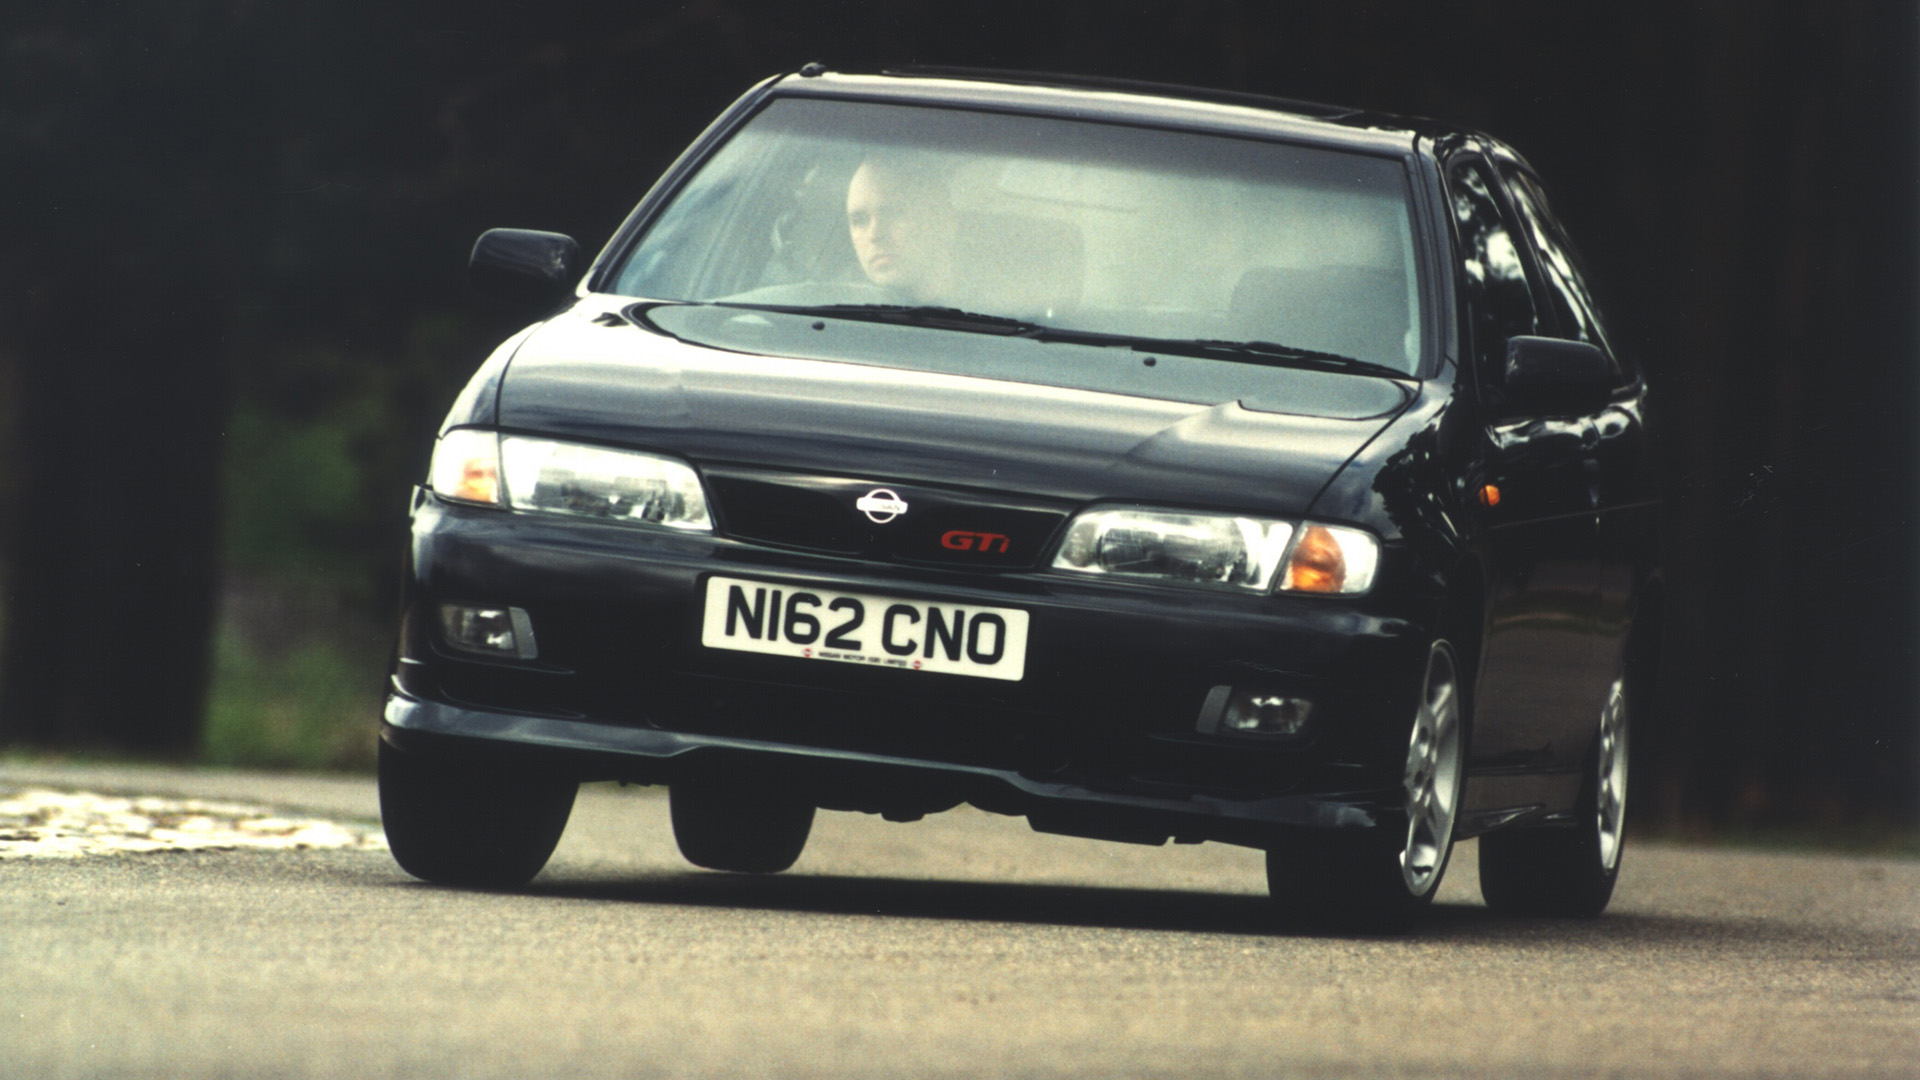 The 25 coolest hot hatchbacks of the 1990s - Retro Motor